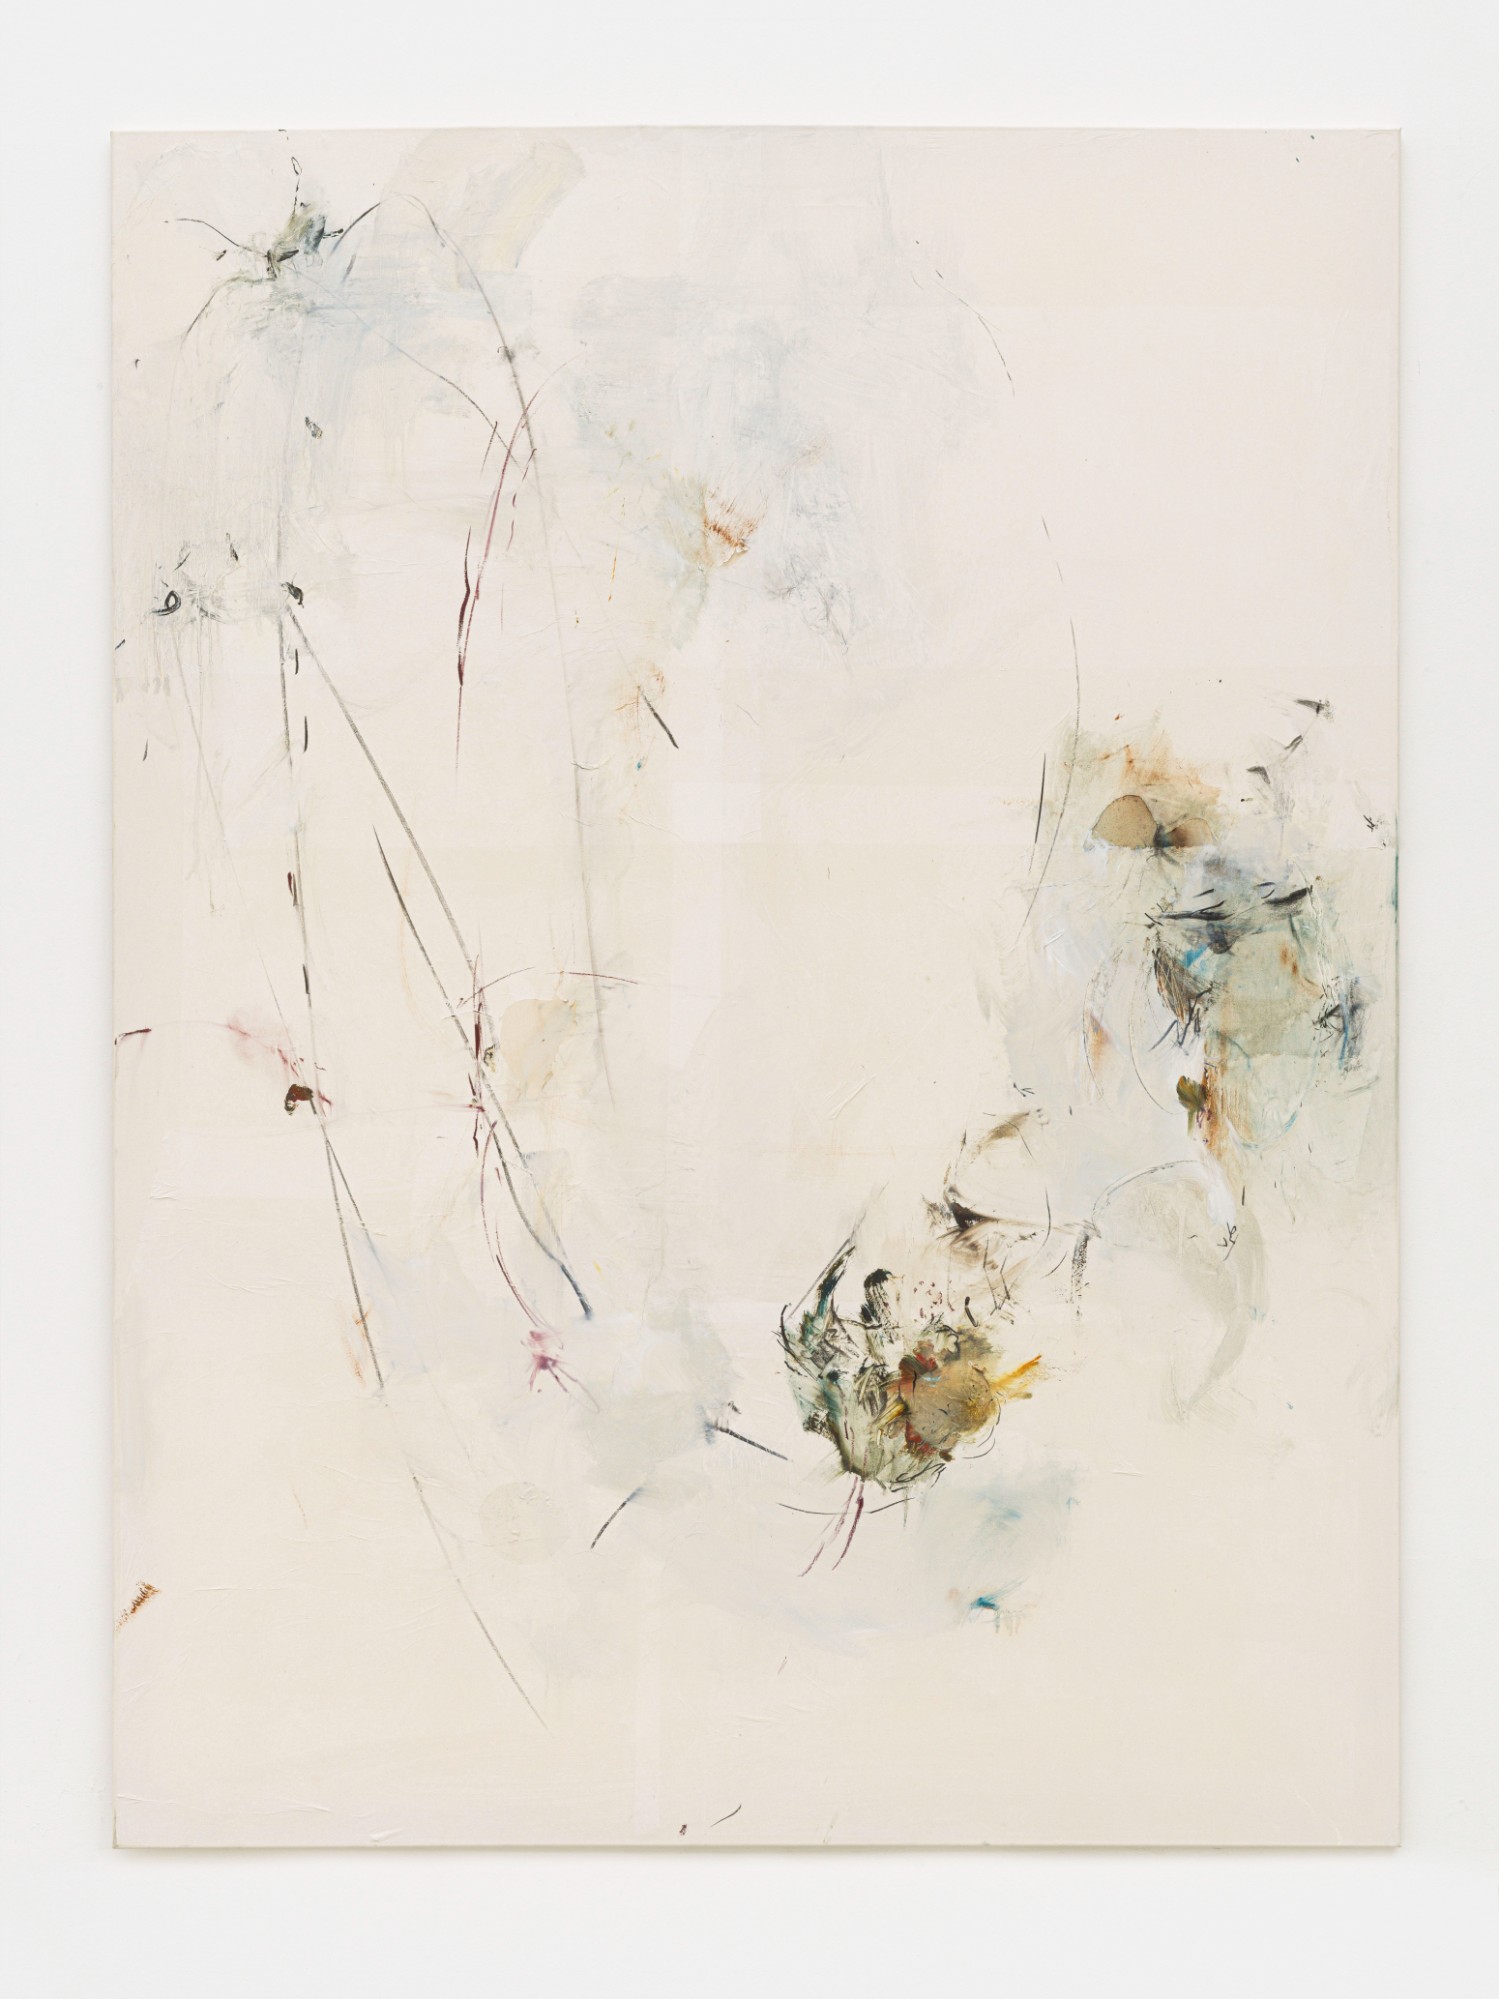 Hinako Miyabayashi, Towards the Cold Unknown, 2023, oil and paper (tissue paper) on canvas, 240 x 180 cm